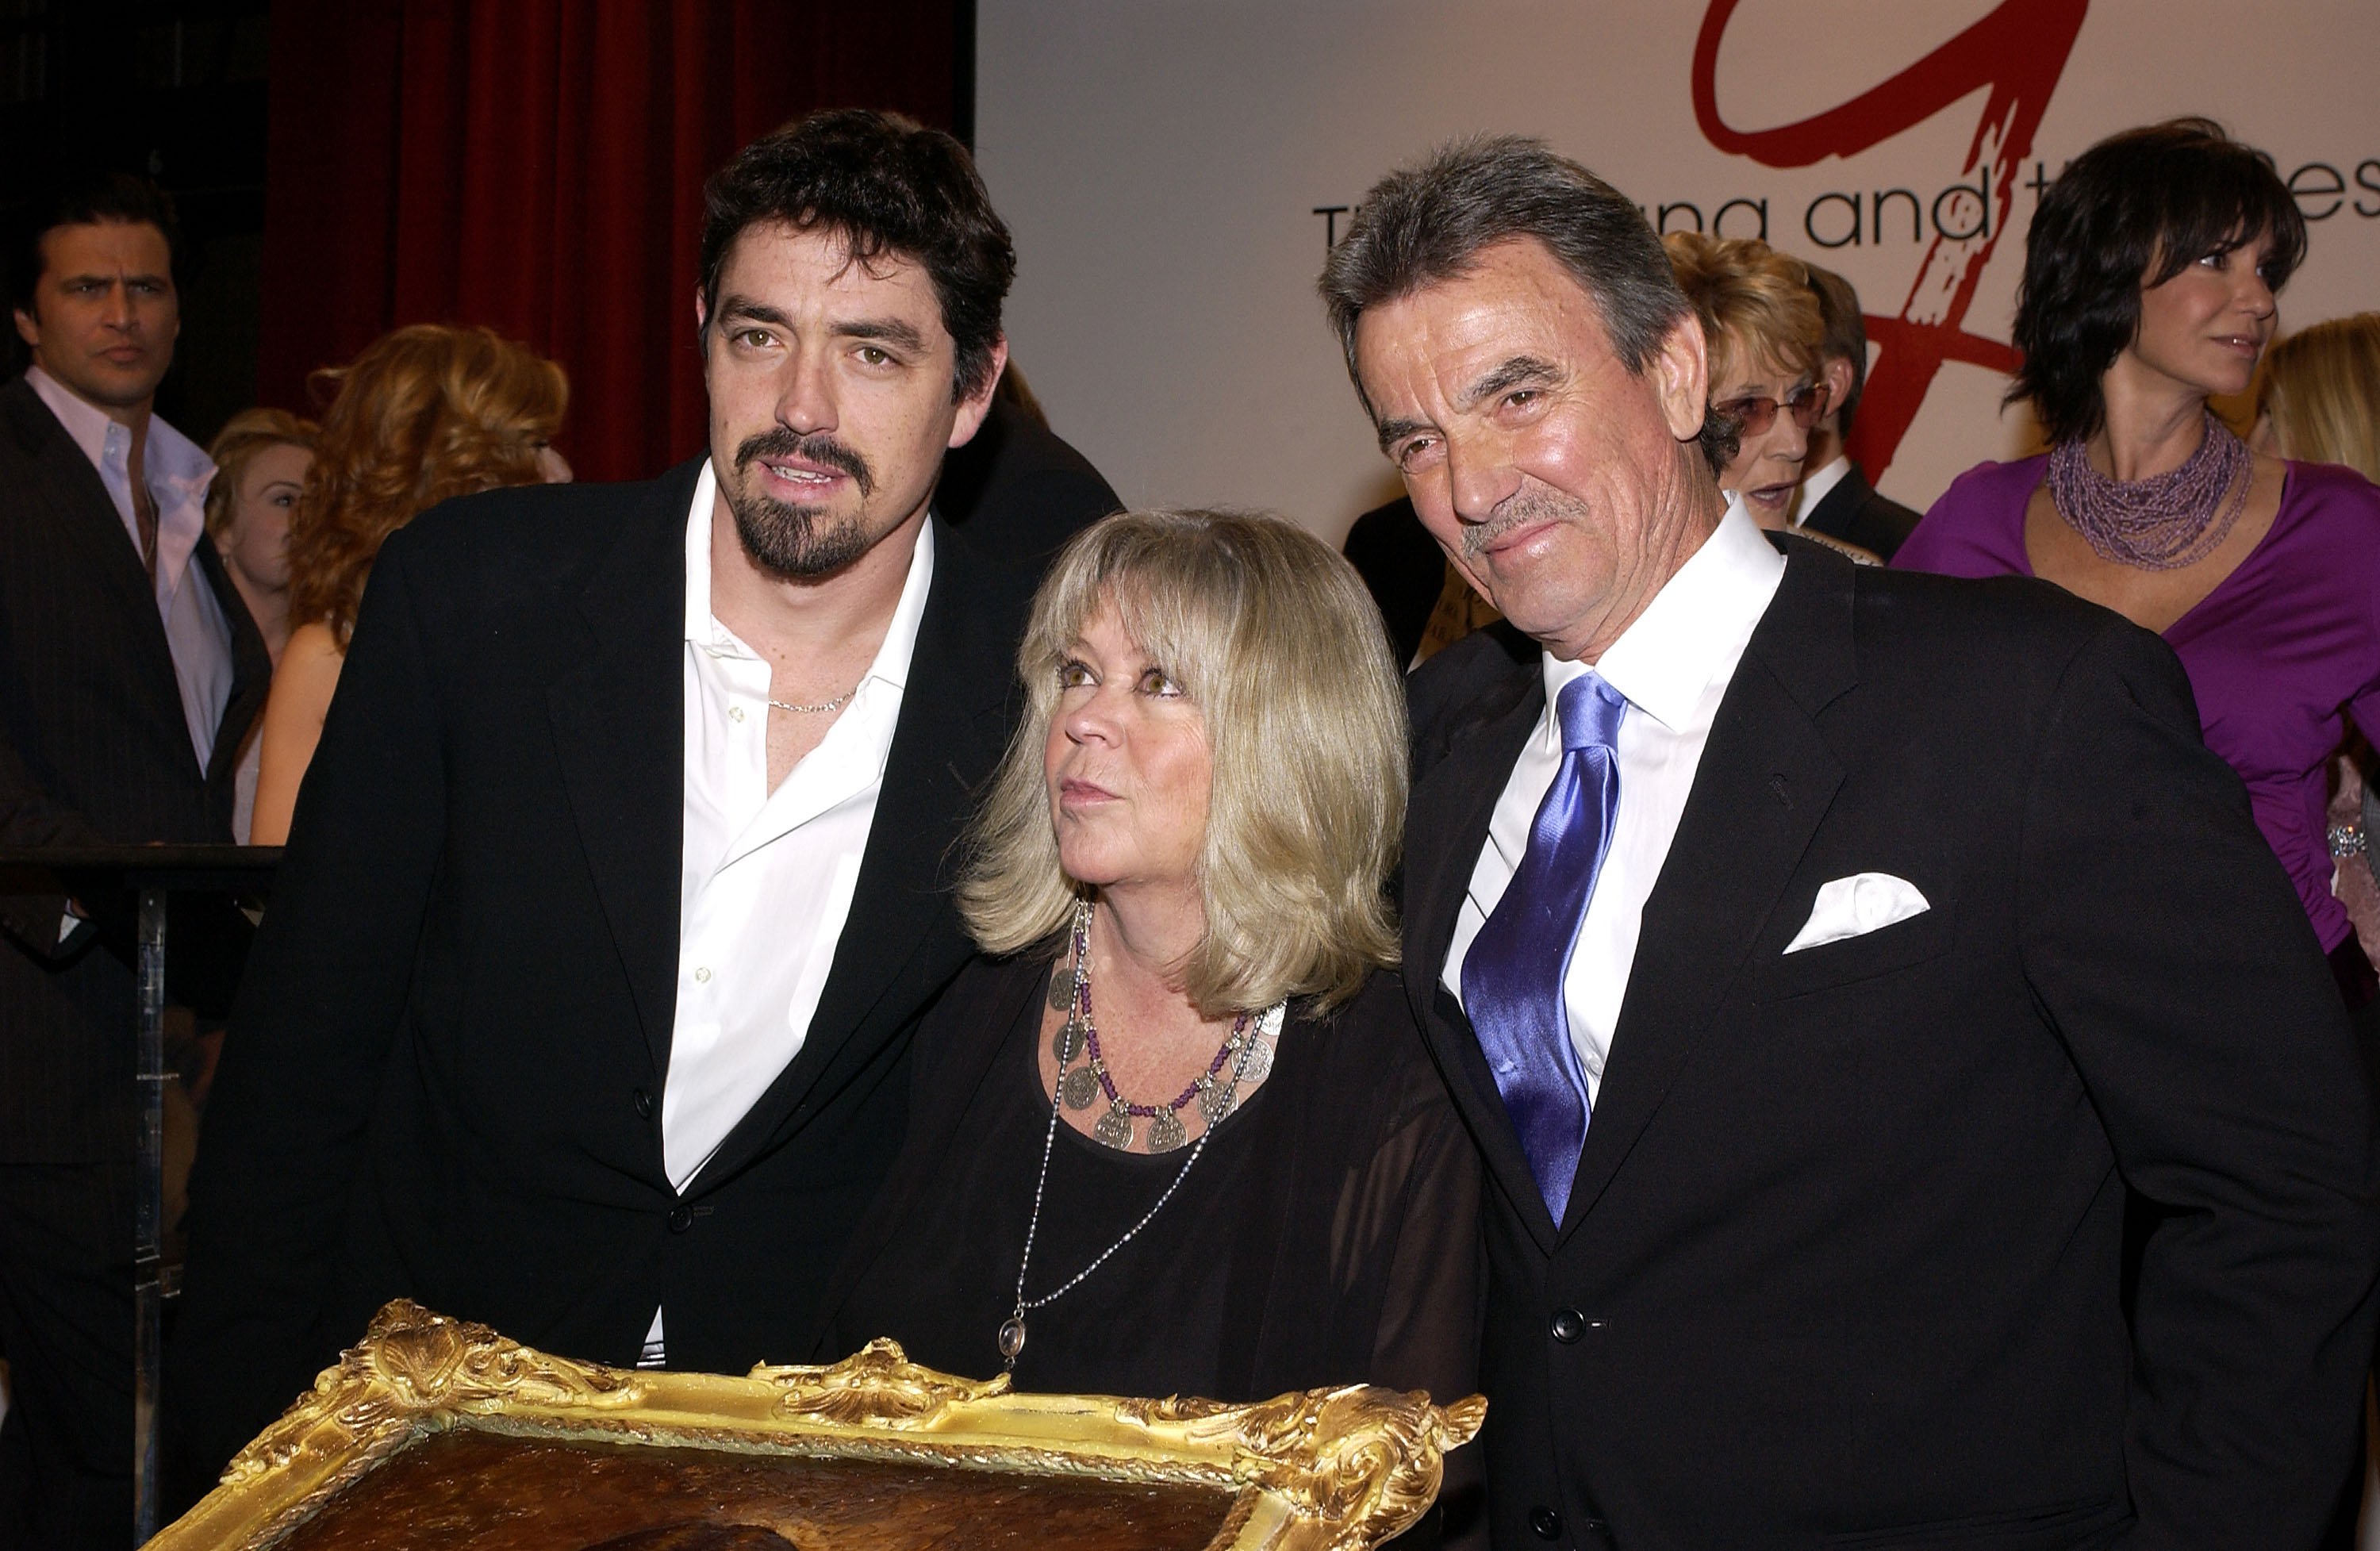  Eric Braeden, his wife Dale and their son Christian celebrate Braeden's 25th anniversary playing legendary character Victor Newman on "The Young and The Restless" at a special ceremony on February 1, 2005 | Source: Getty Images